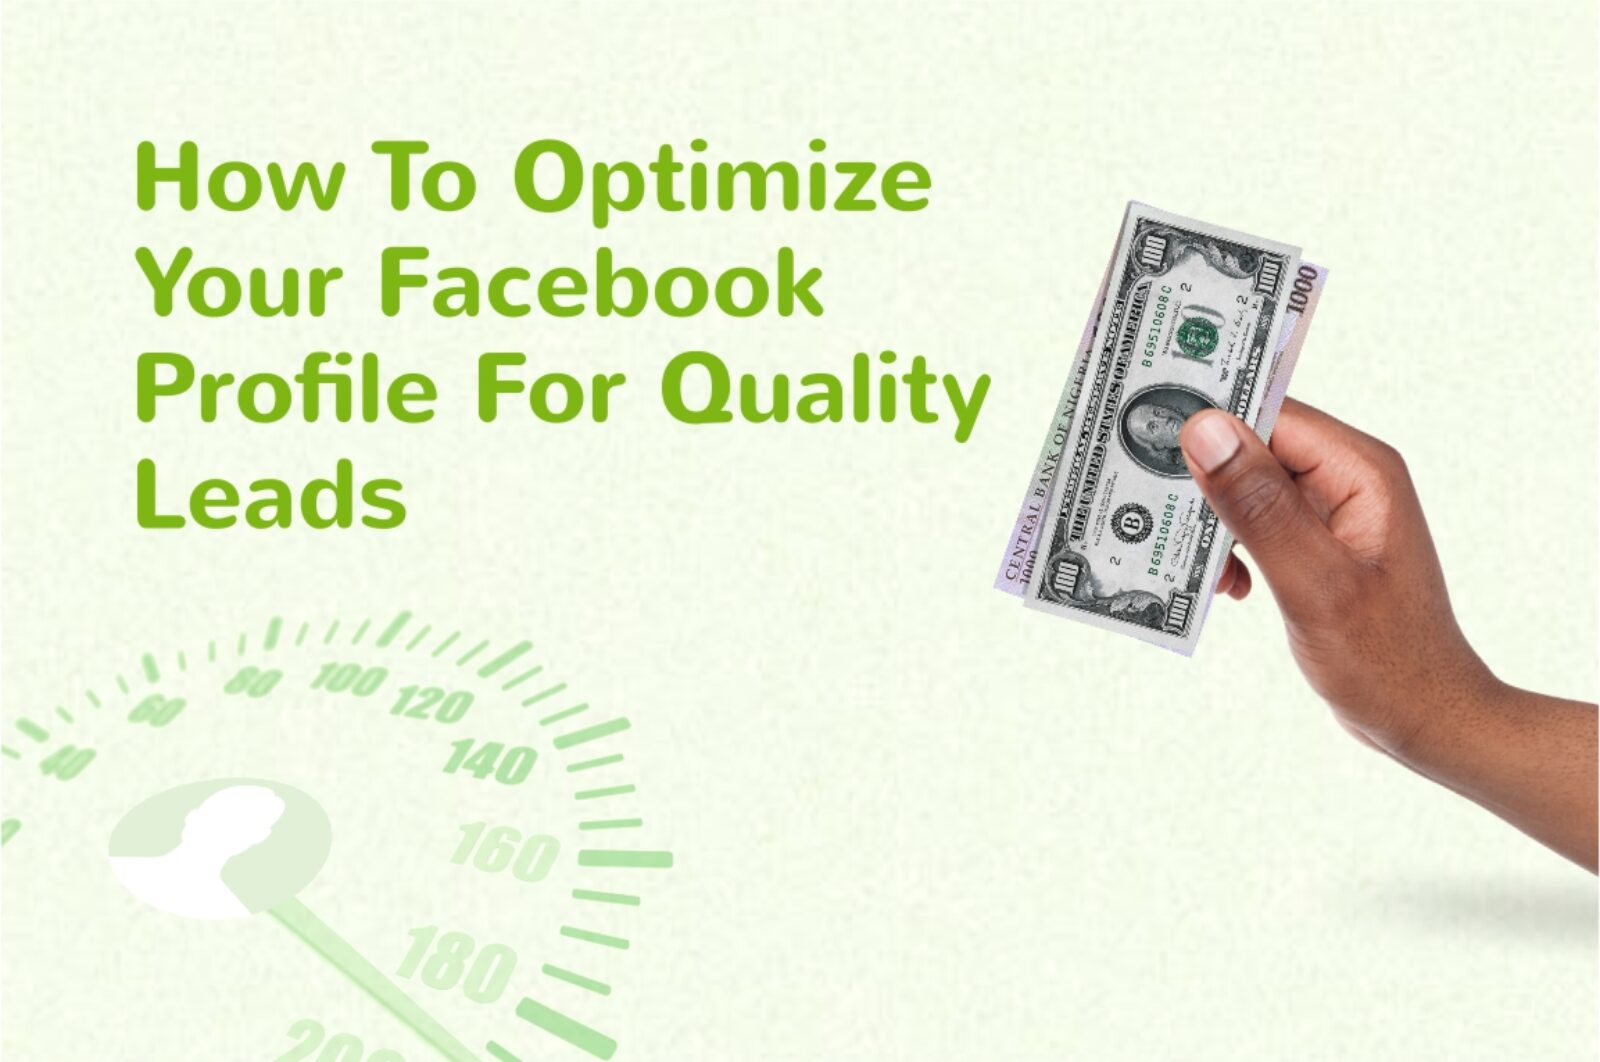 How to get quality leads on Facebook